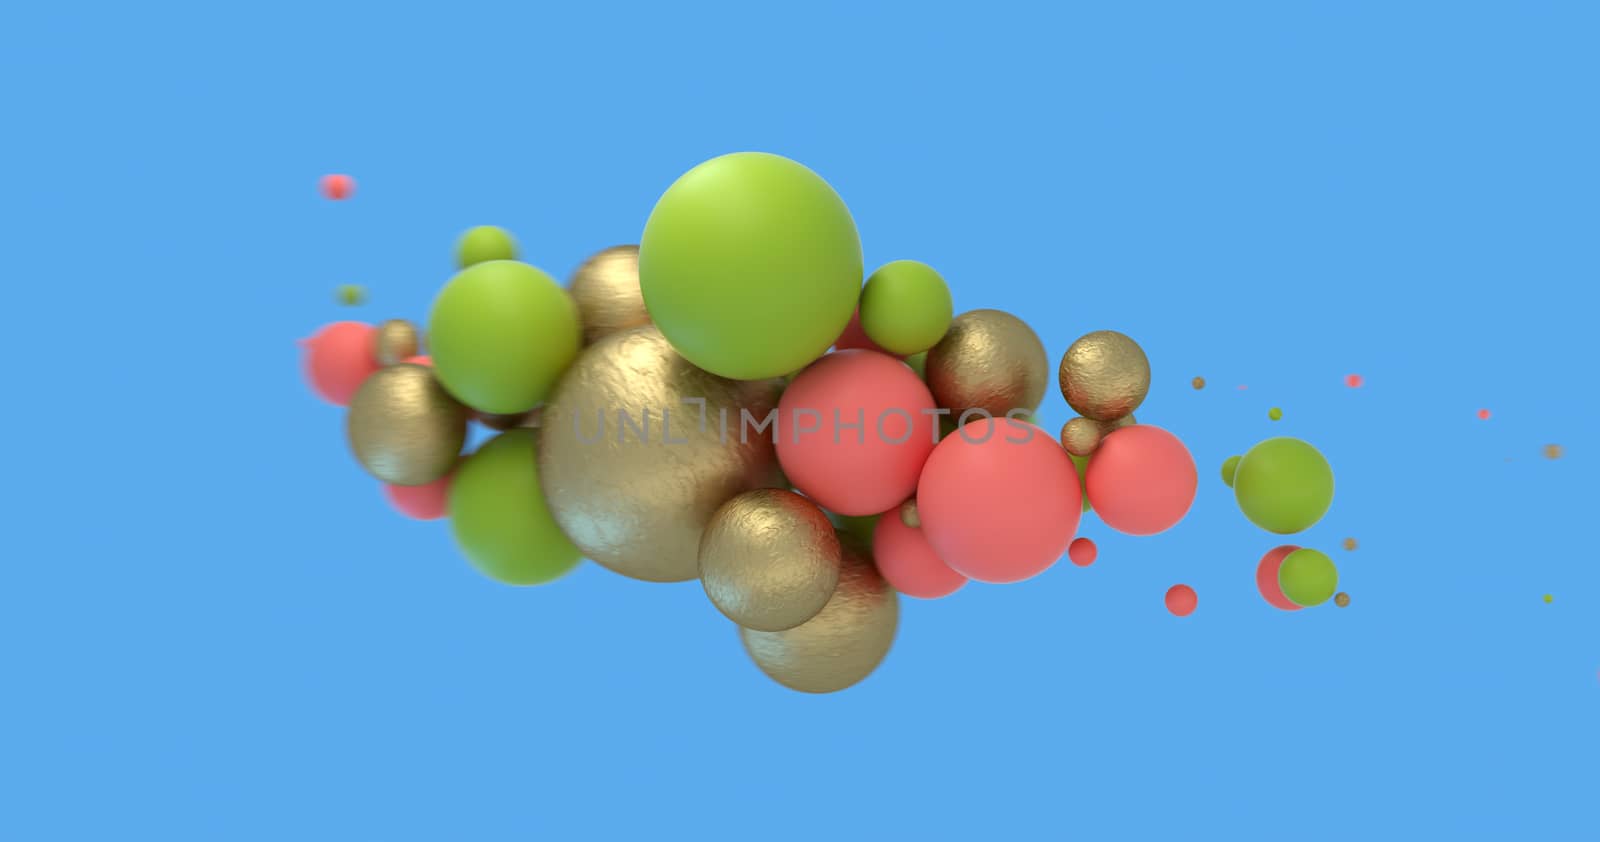 Abstract background with Living Coral, golden and green spheres on blue. Fashion sale banner design. 3D render